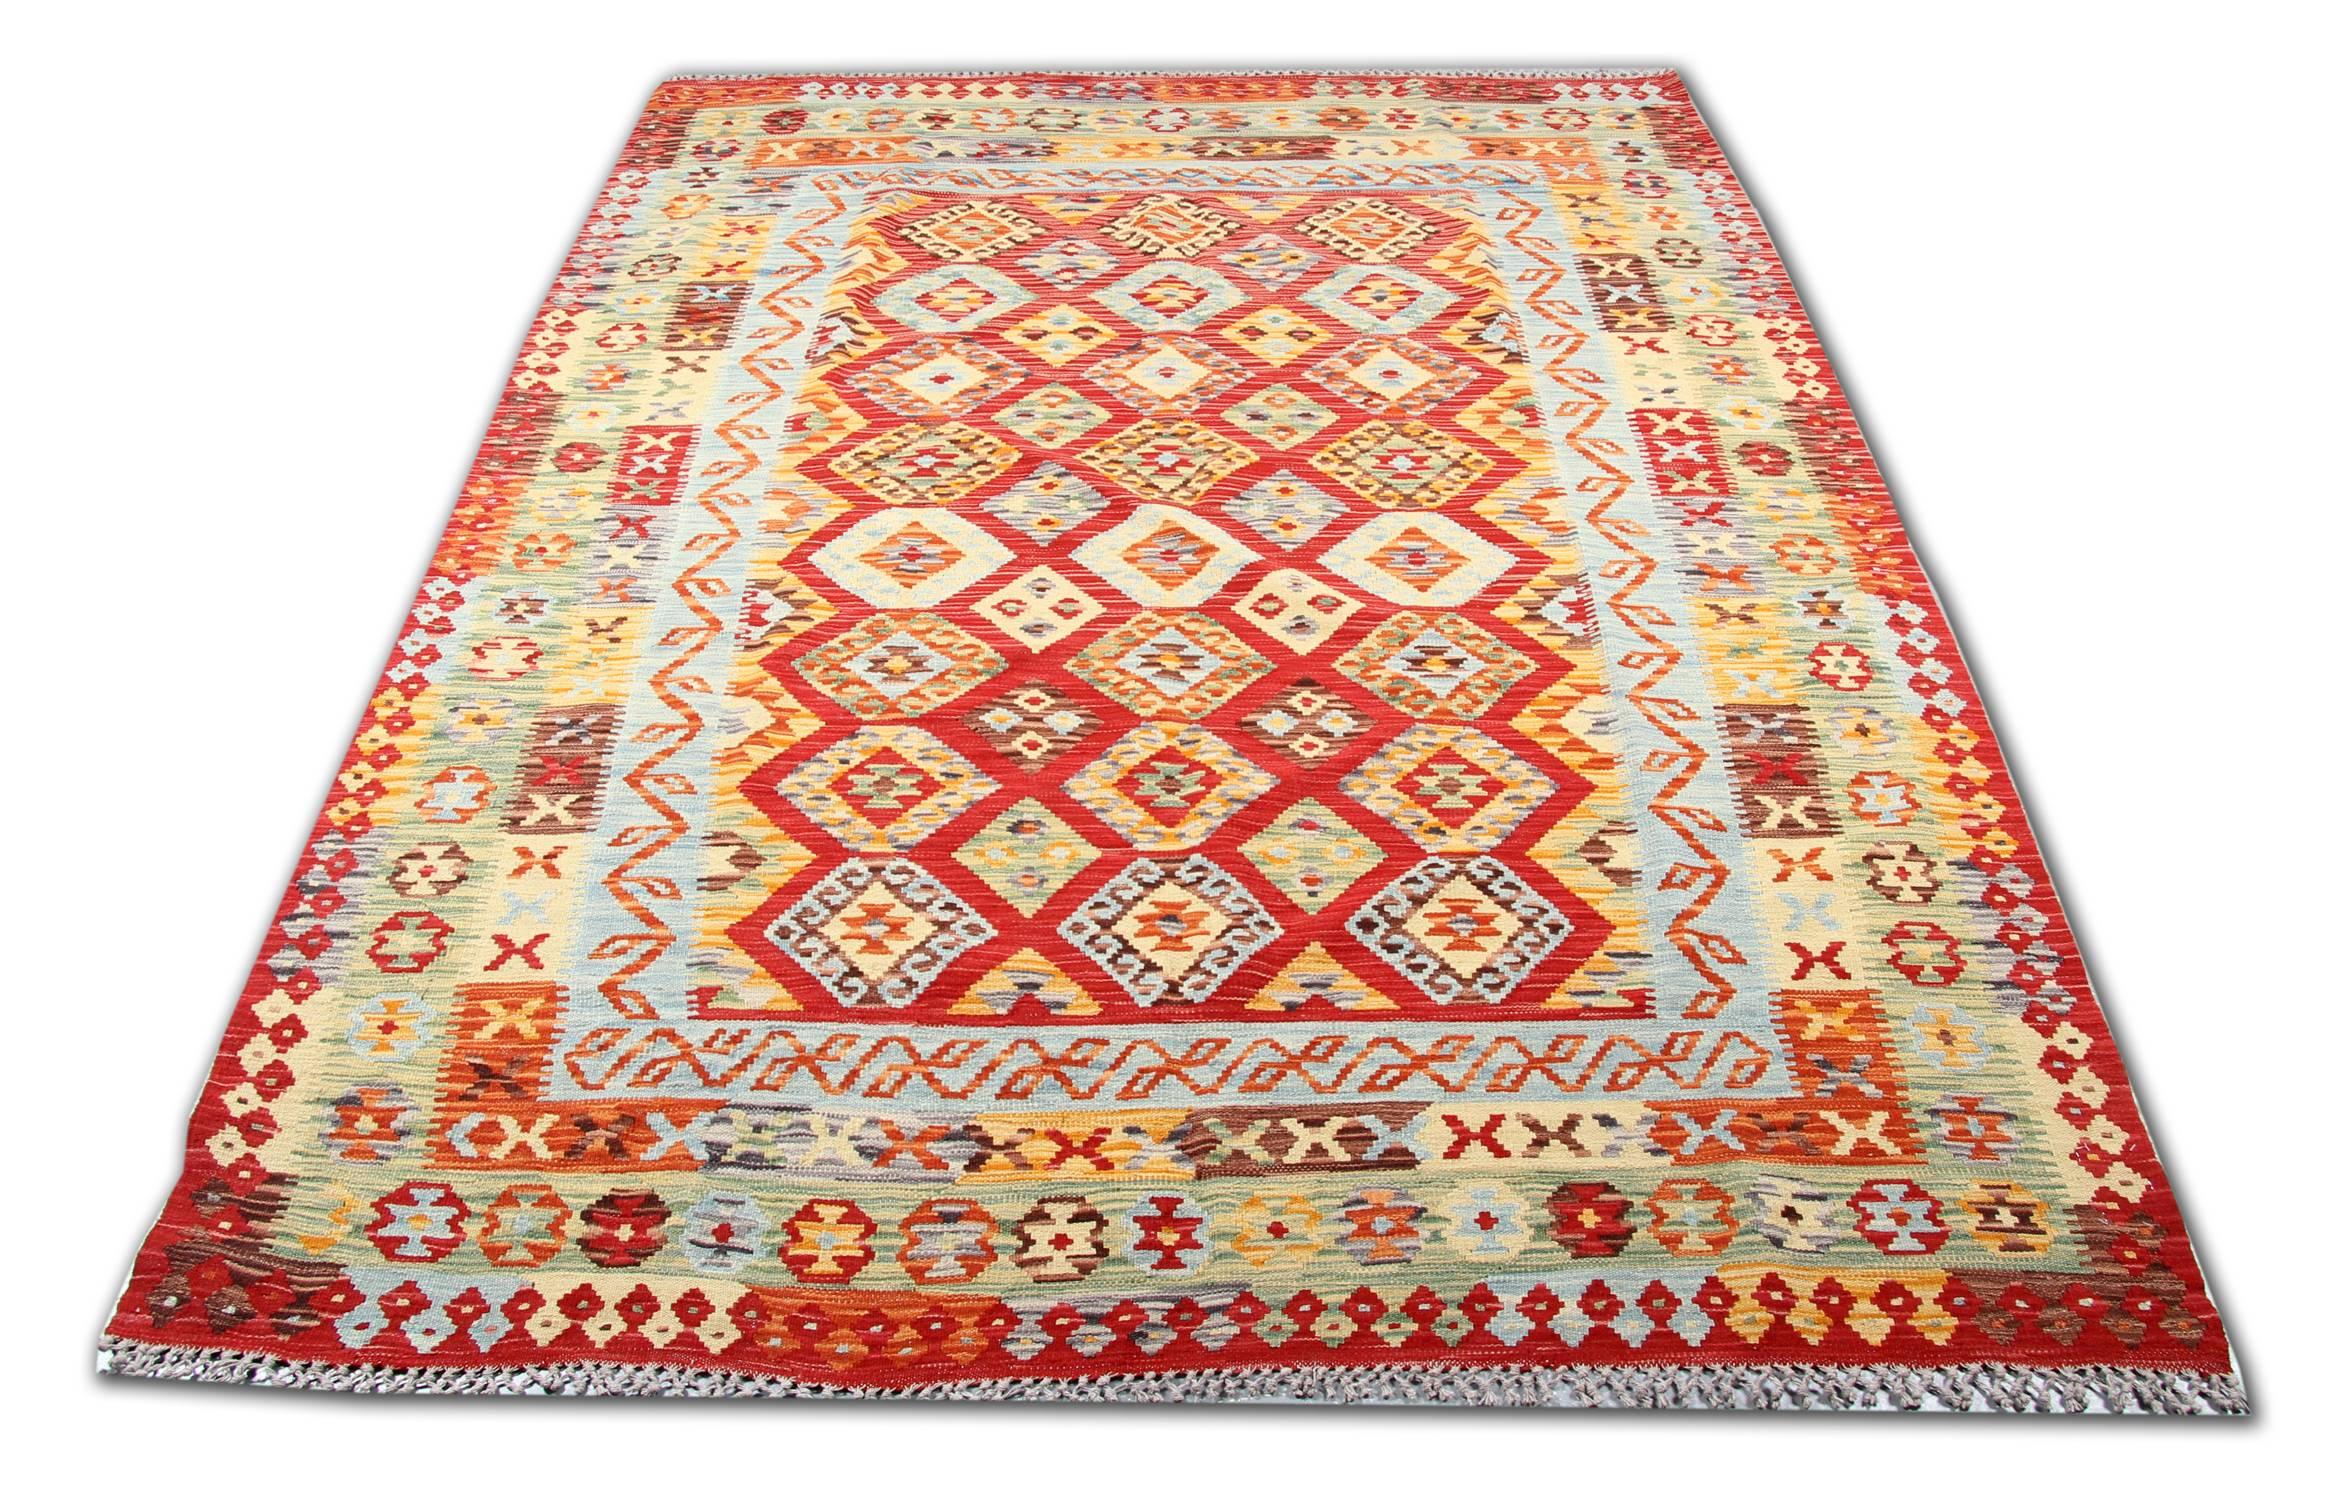 This kilim is handwoven in Afghanistan  by Uzbek and Turkman tribes. The kilim is newly made, but reports the classical designs which originate from the well known Qashqai Persian tribes. The value of the carpet is represented also by its natural